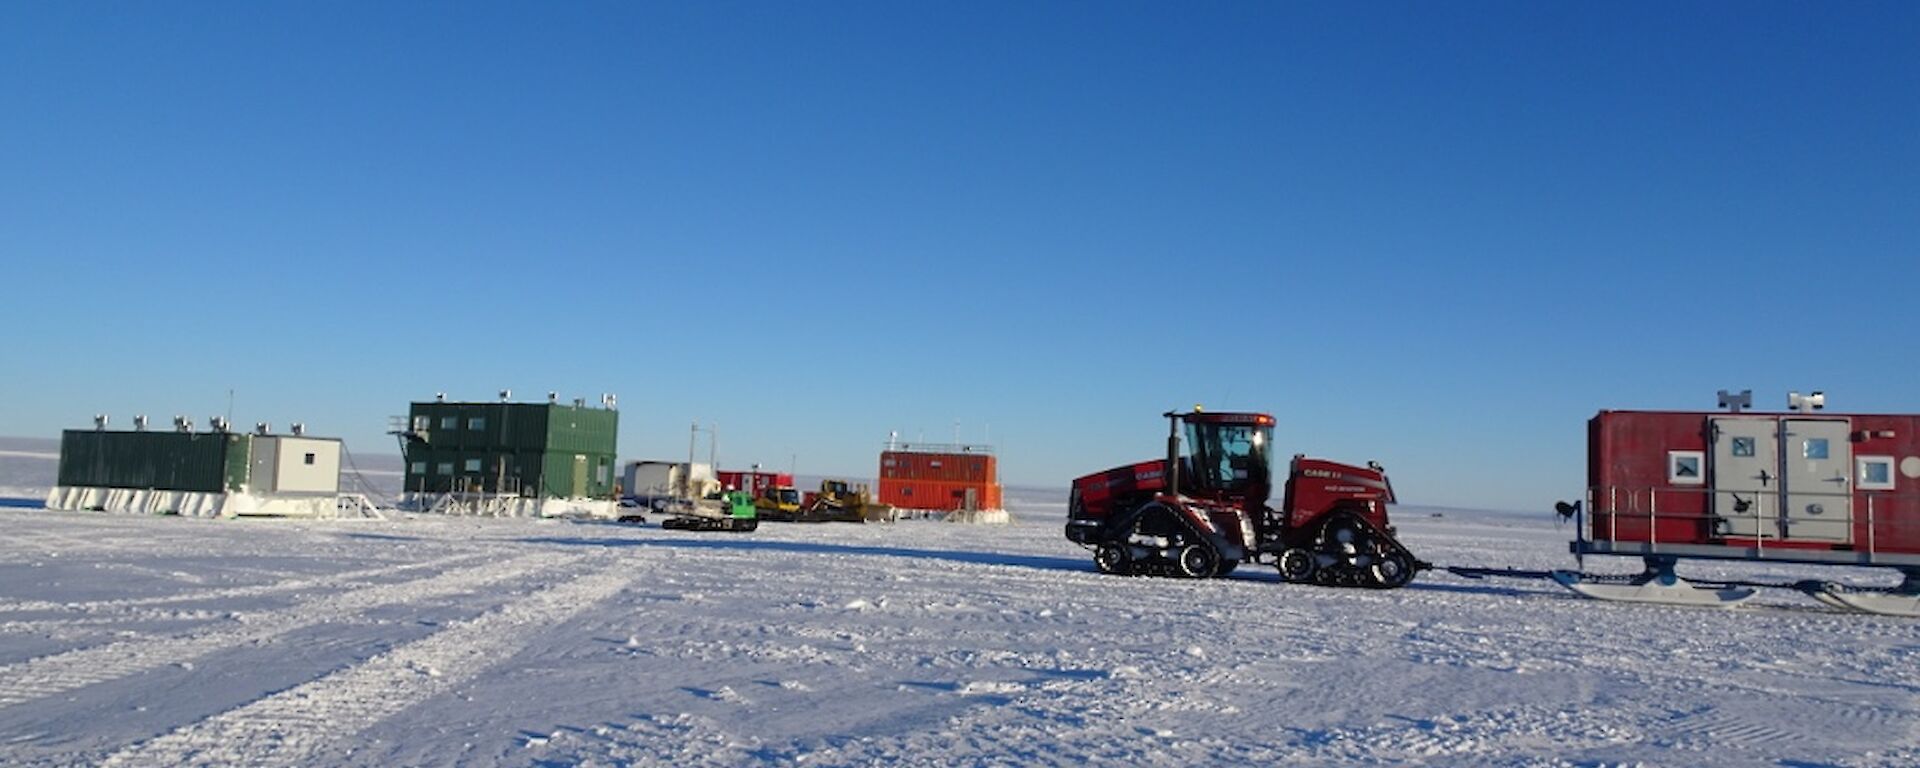 The multi-coloured builds in the background and the Quadtrak tractor towing a sled in the foreground, all on a blue sky day.